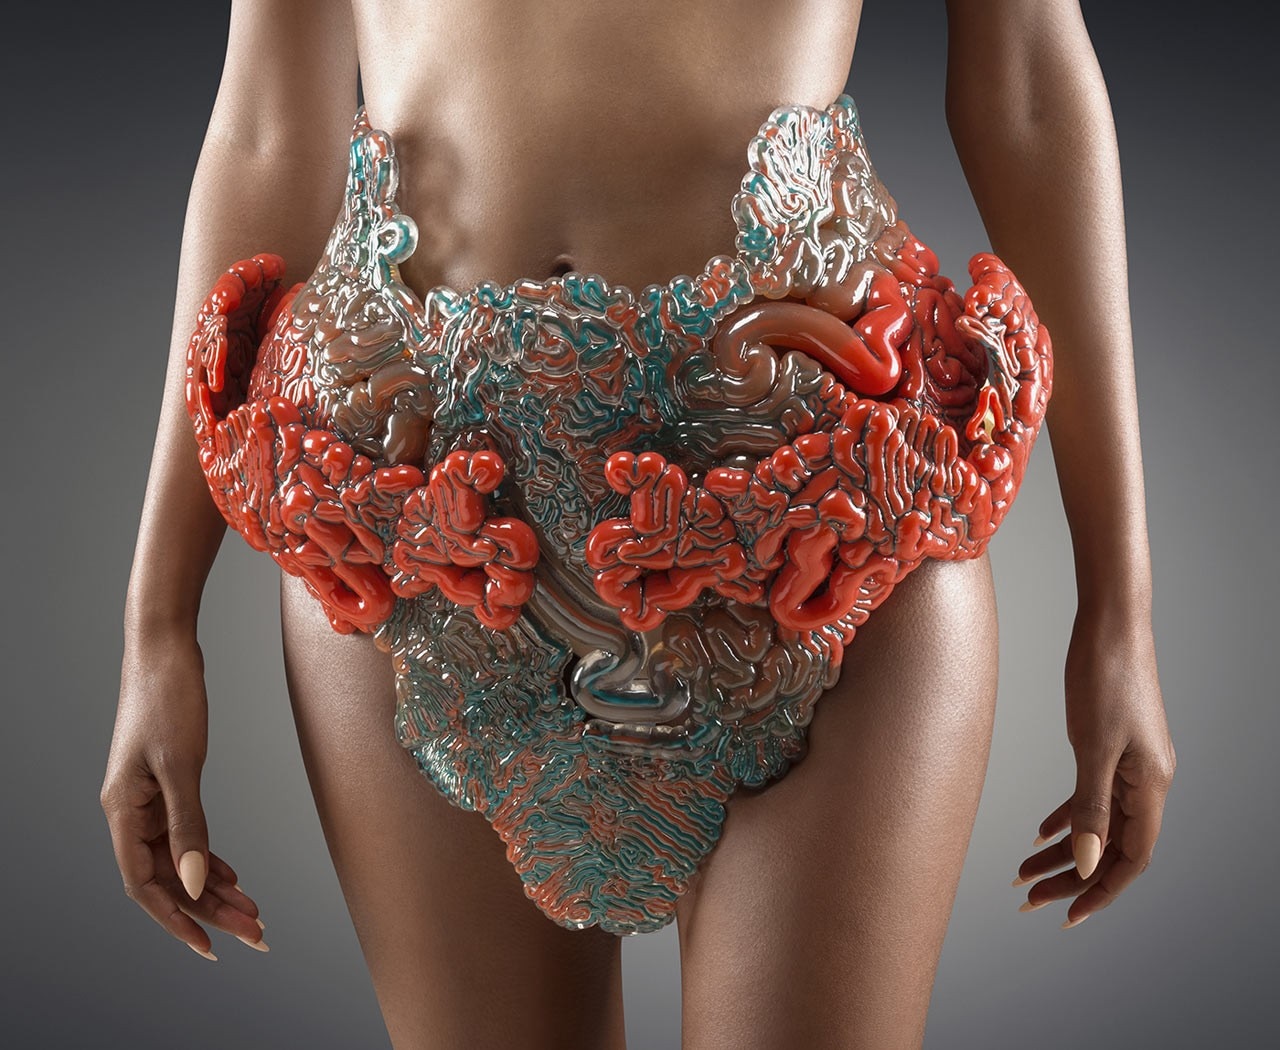 Neri Oxman in collaboration with Christoph Bader and Dominik Kolb, Wanderers collection, Mushtari. Produced by Stratasys on the Objet500 Connex3 3D Production System. Photo credit: Yoram Reshef. Photo courtesy of Neri Oxman.